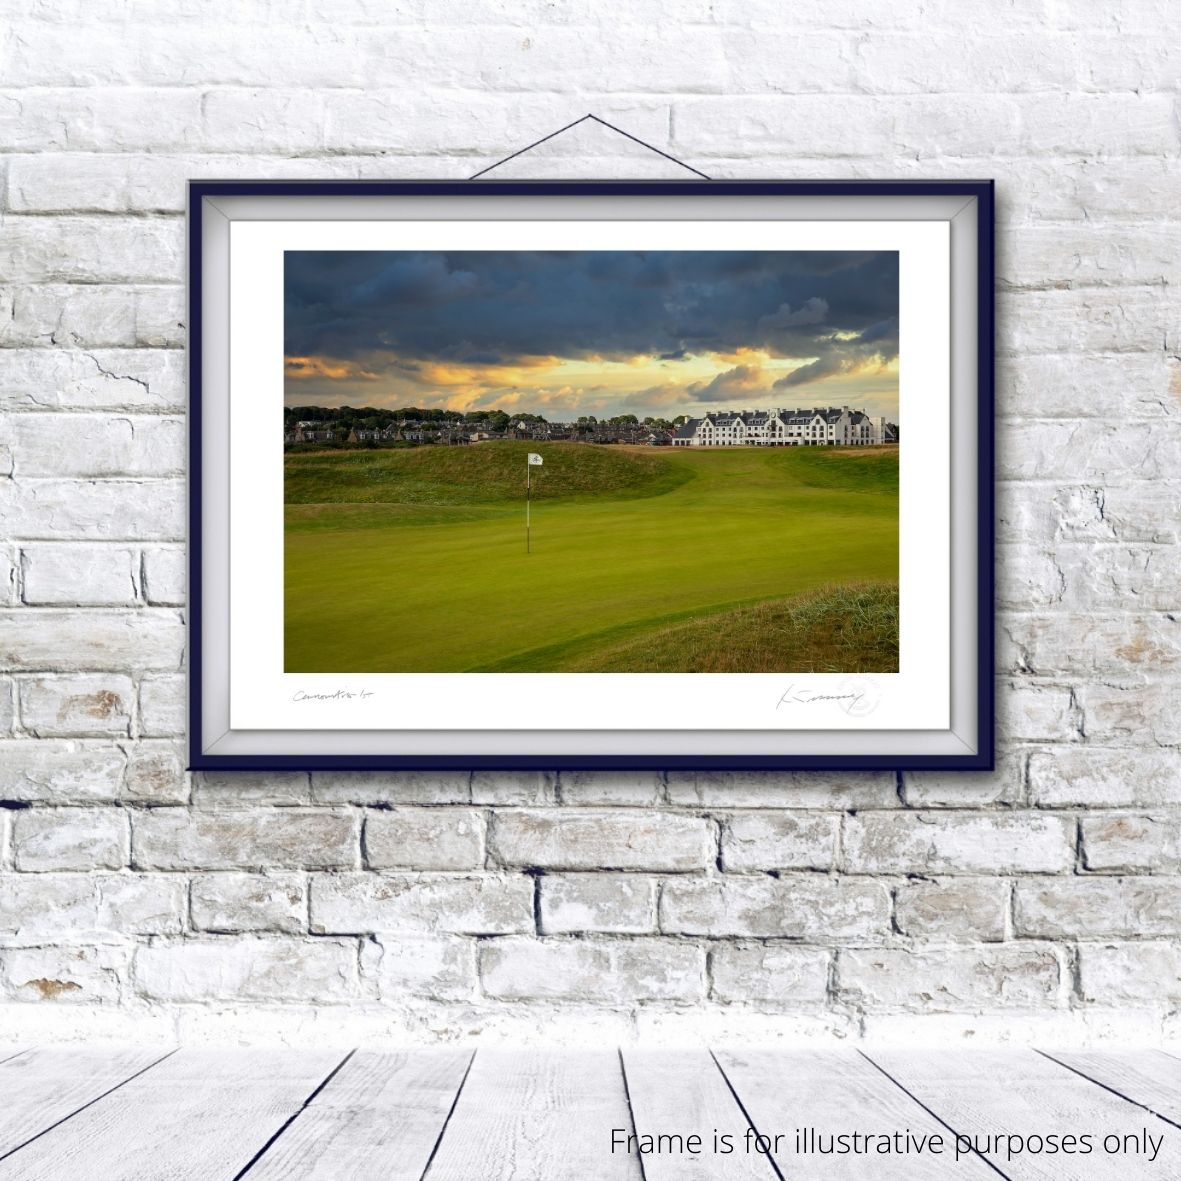 Carnoustie Golf Links 1st by Kevin Murray